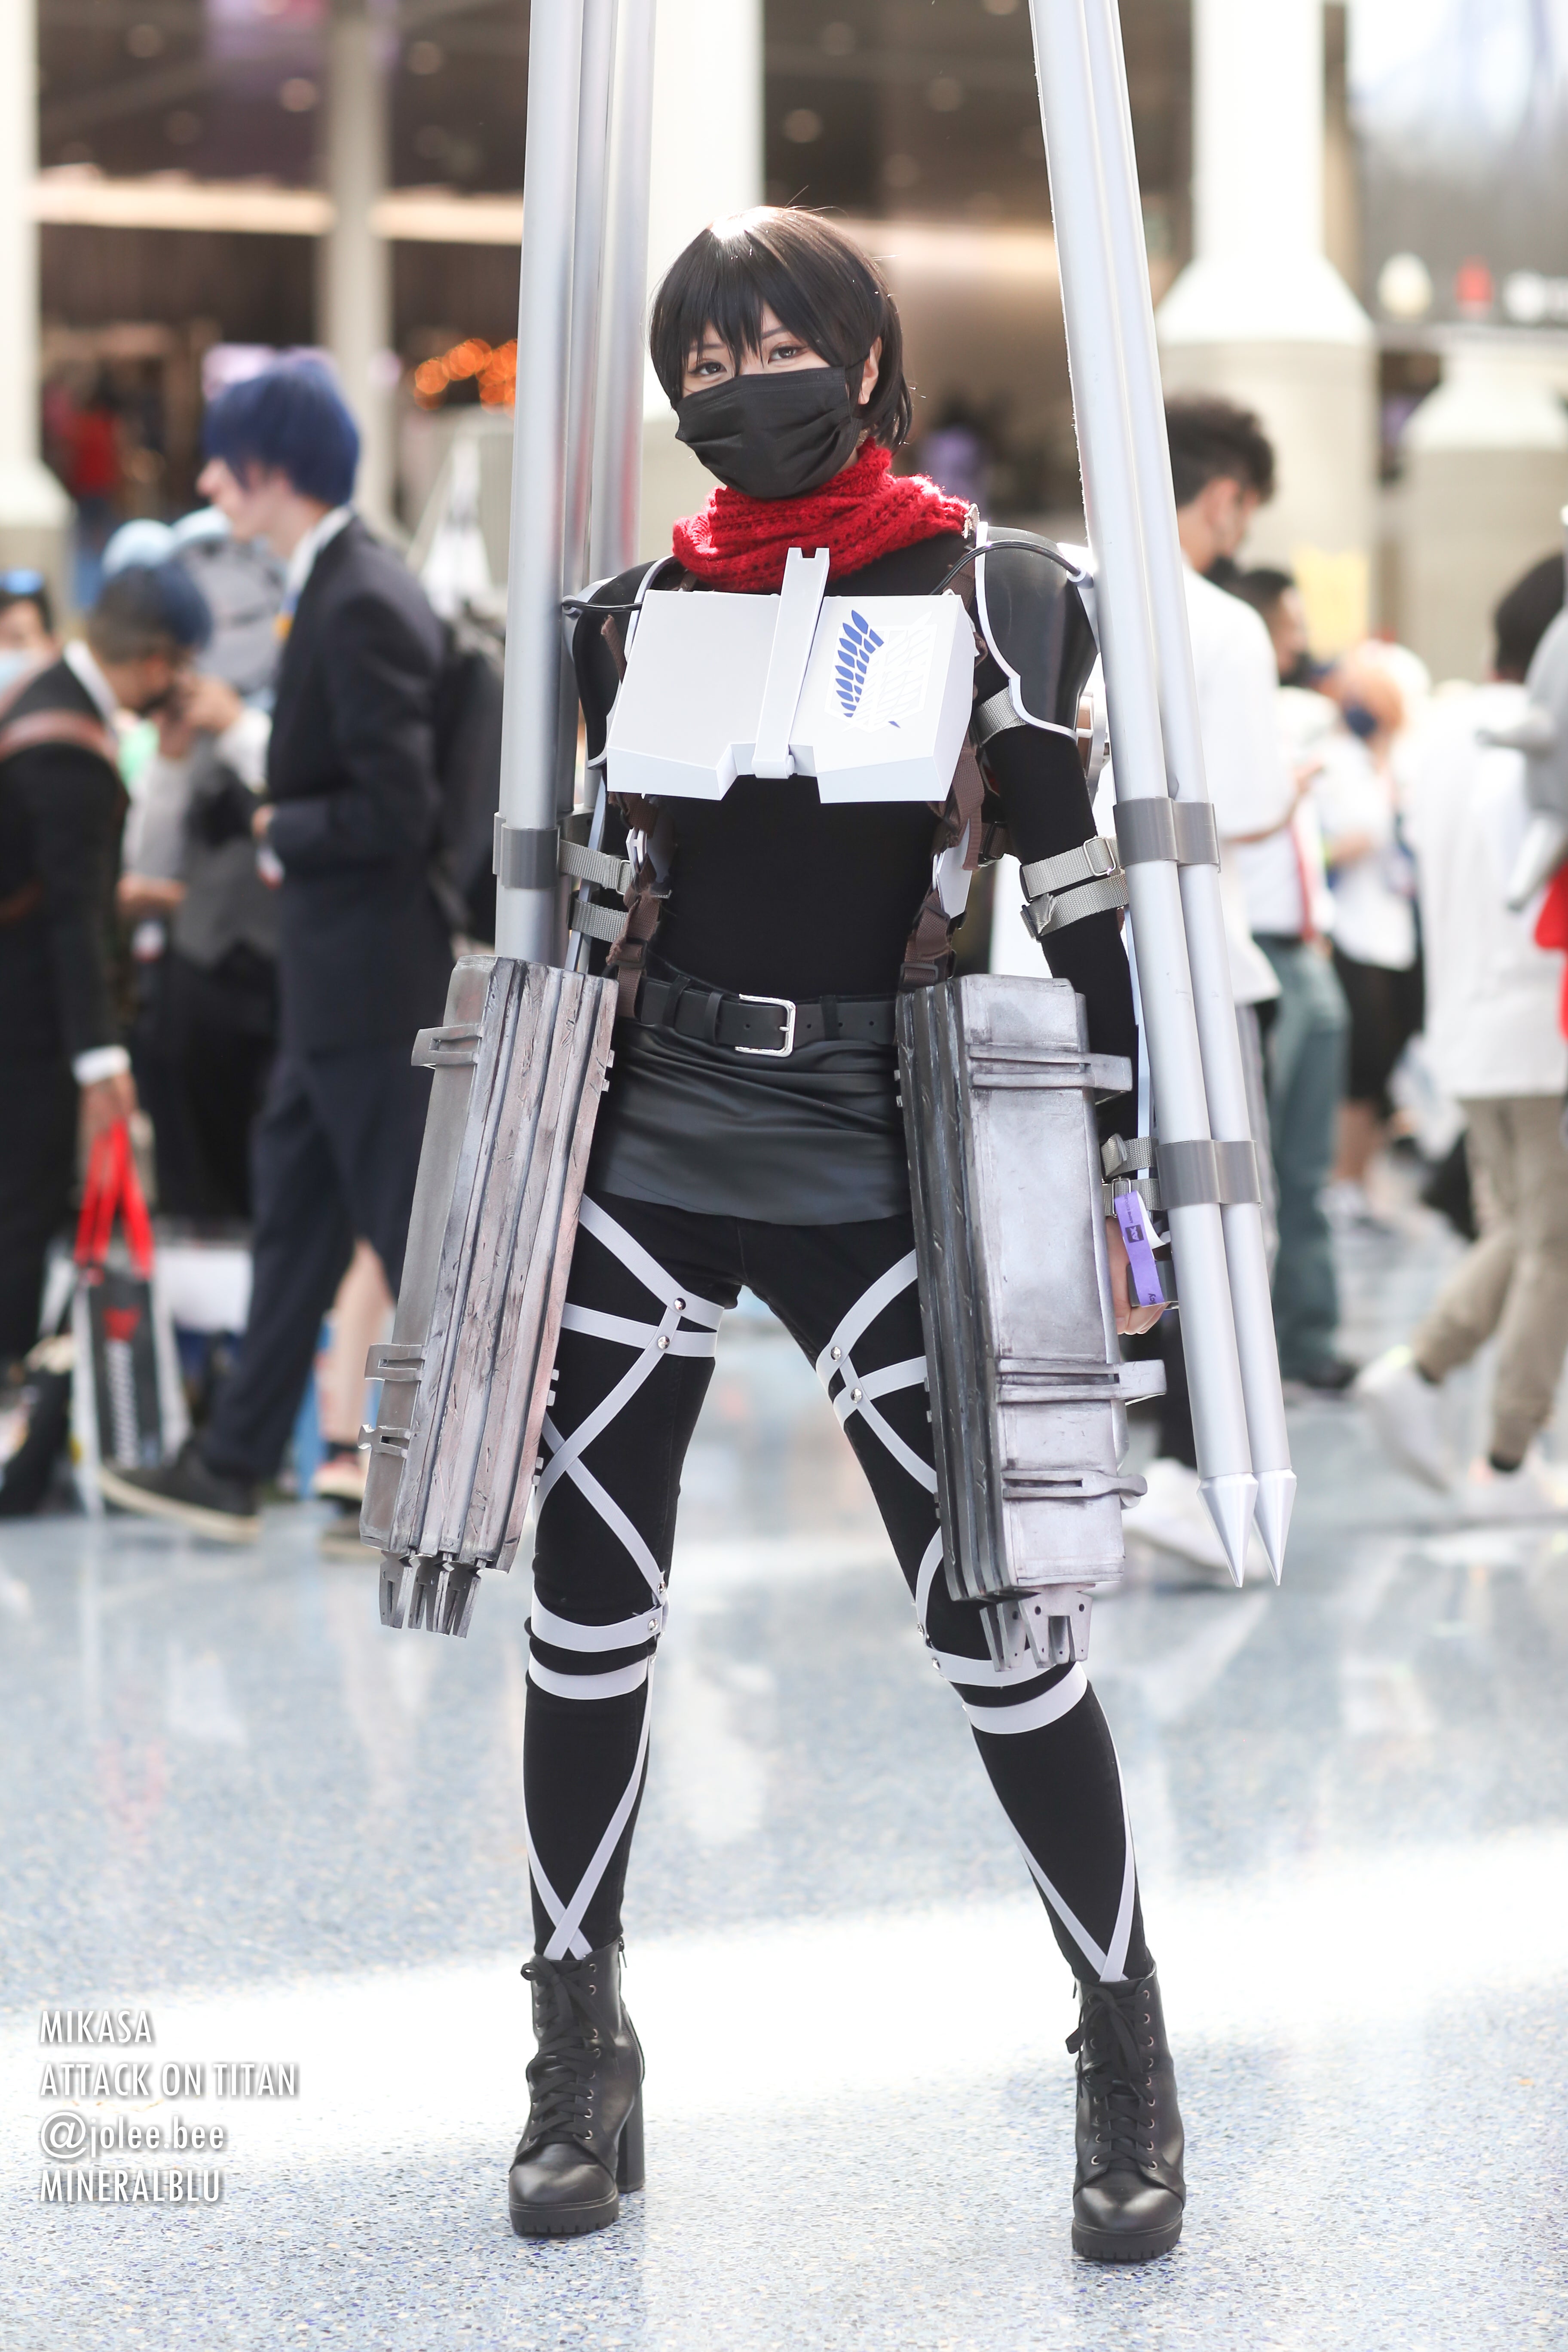 Our Favourite Cosplay From Anime Expo 2022